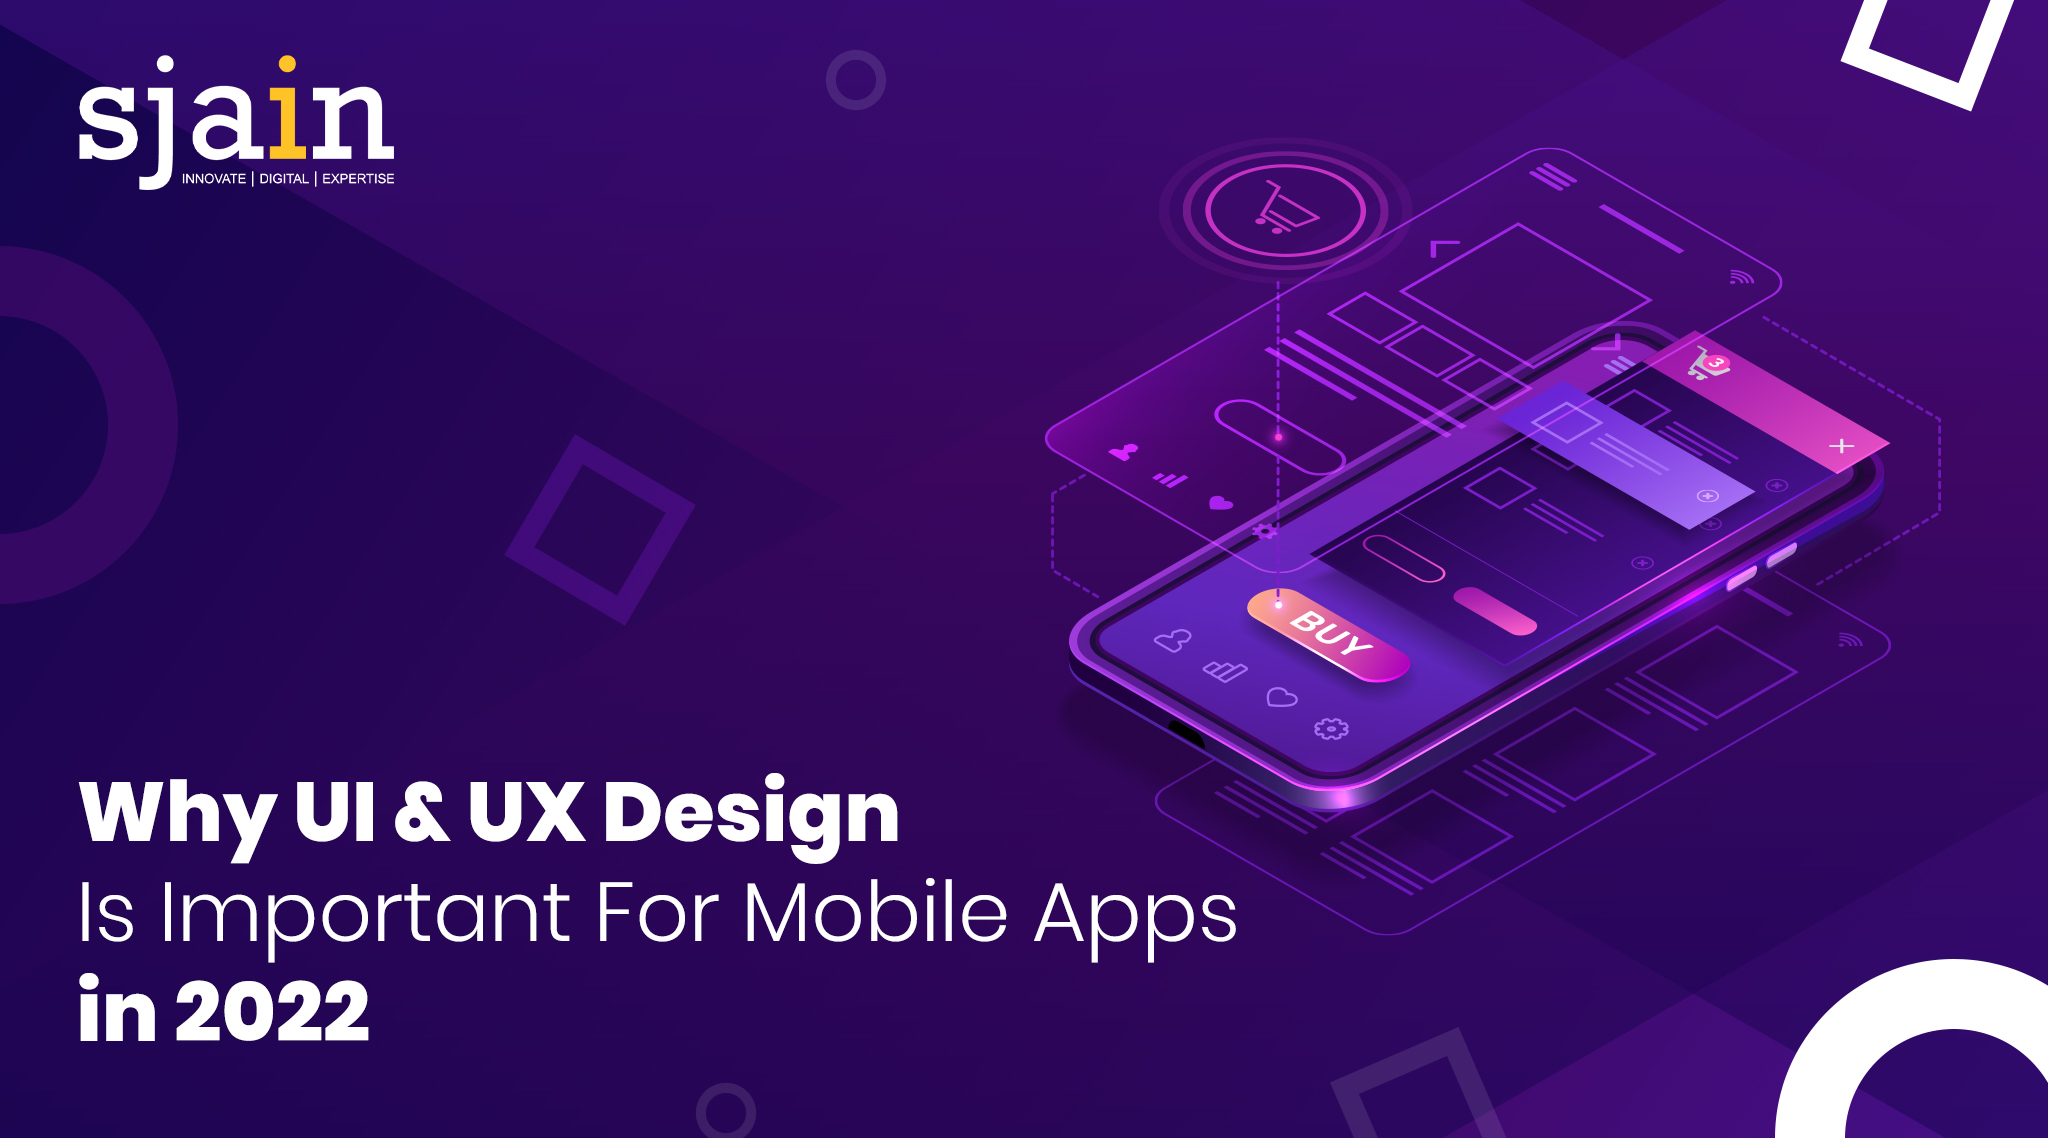 Why UI and UX Design Is Important For Mobile Apps in 2022